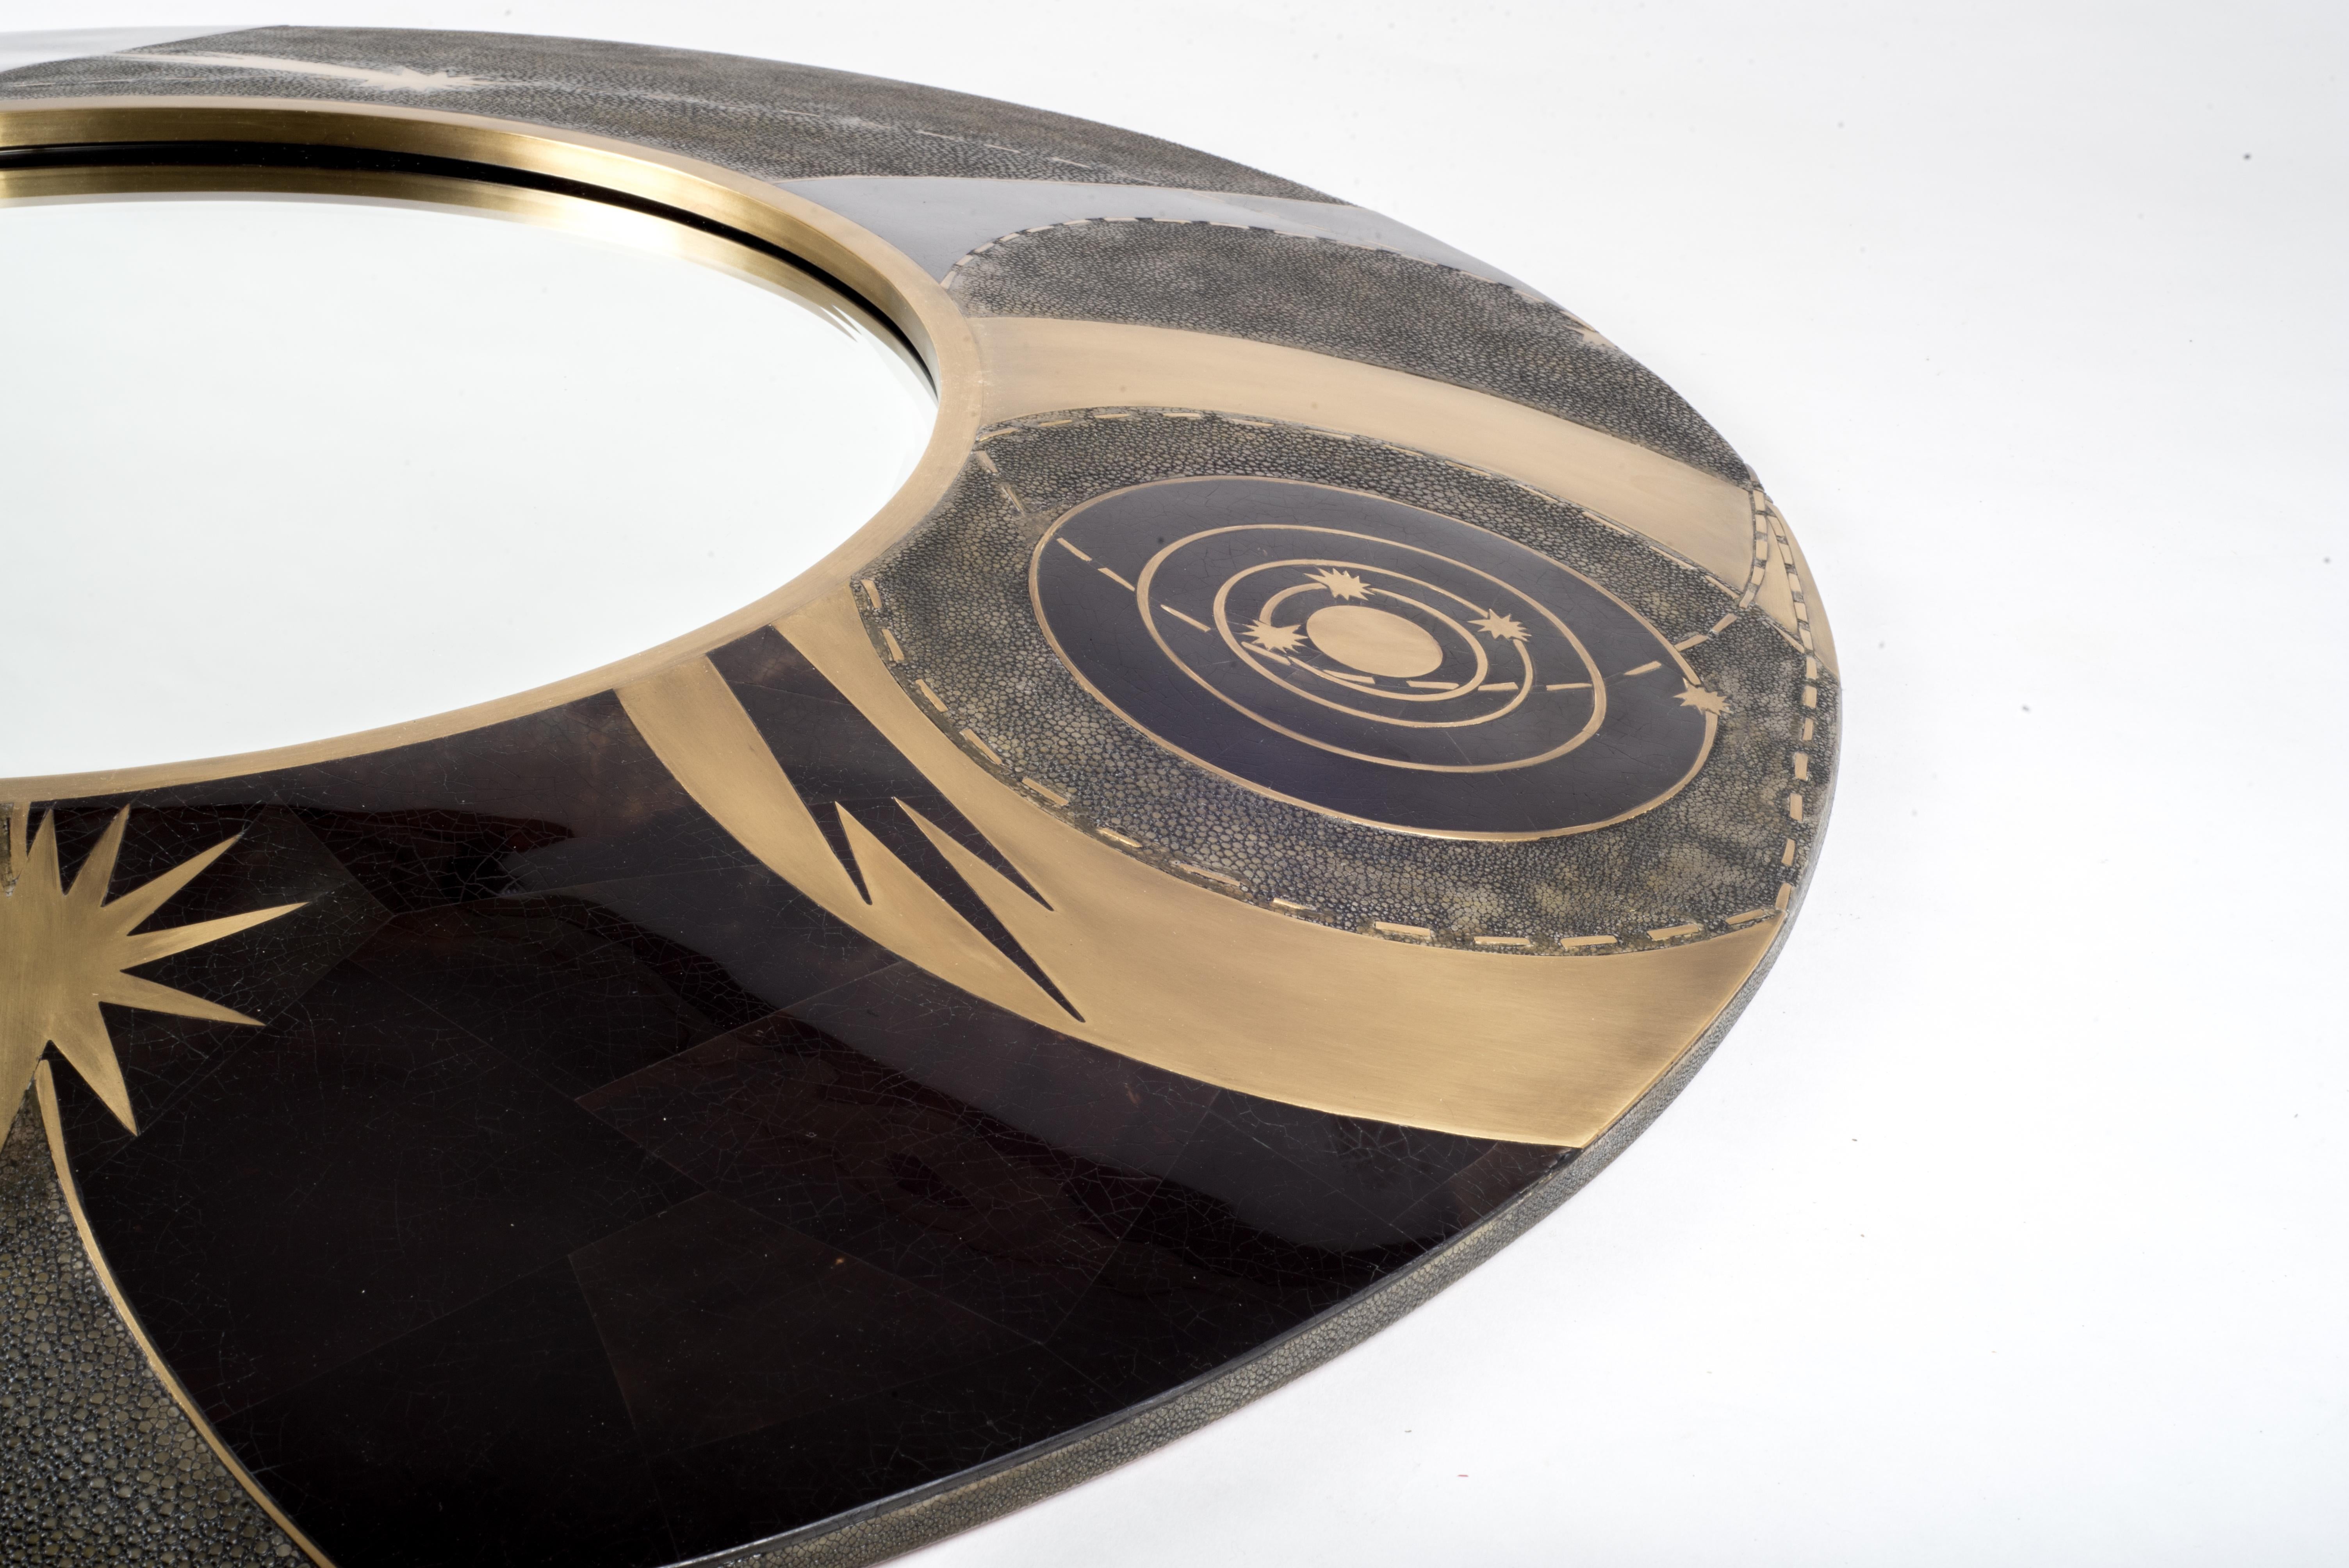 The constellation dark mirror is a statement piece with its celestial inspired roots. The mirror can be hung in 3 different ways. Available in a smaller size and cream finish (image at end of the slide). The shagreen is hand-dyed by artisans and the